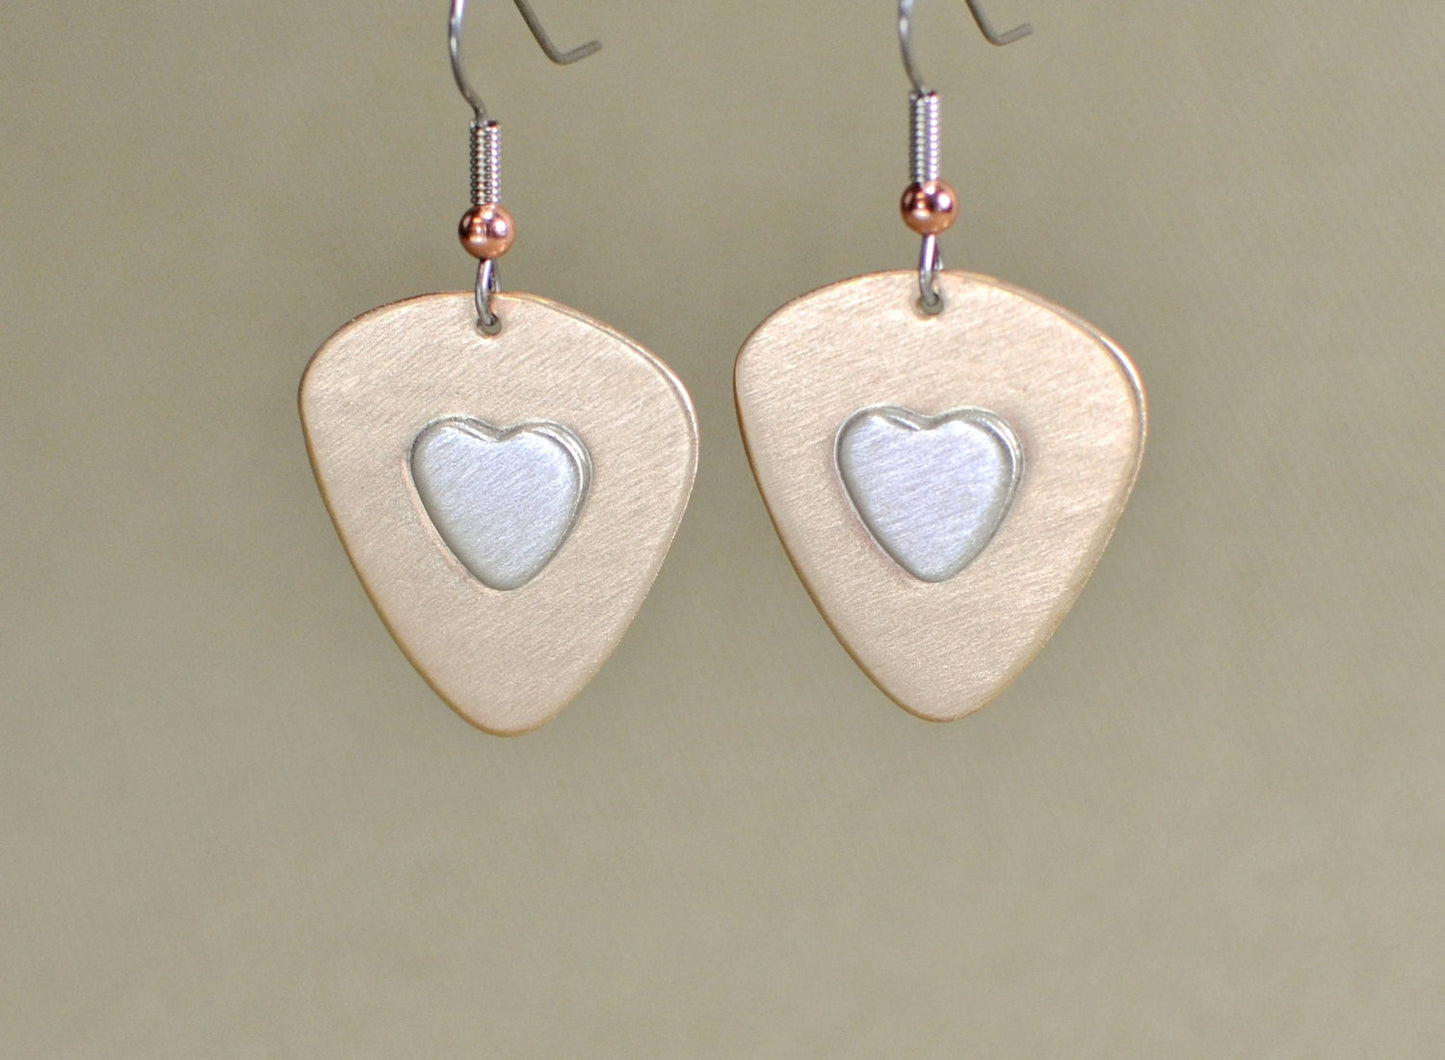 Guitar pick dangle earrings with sterling silver hearts